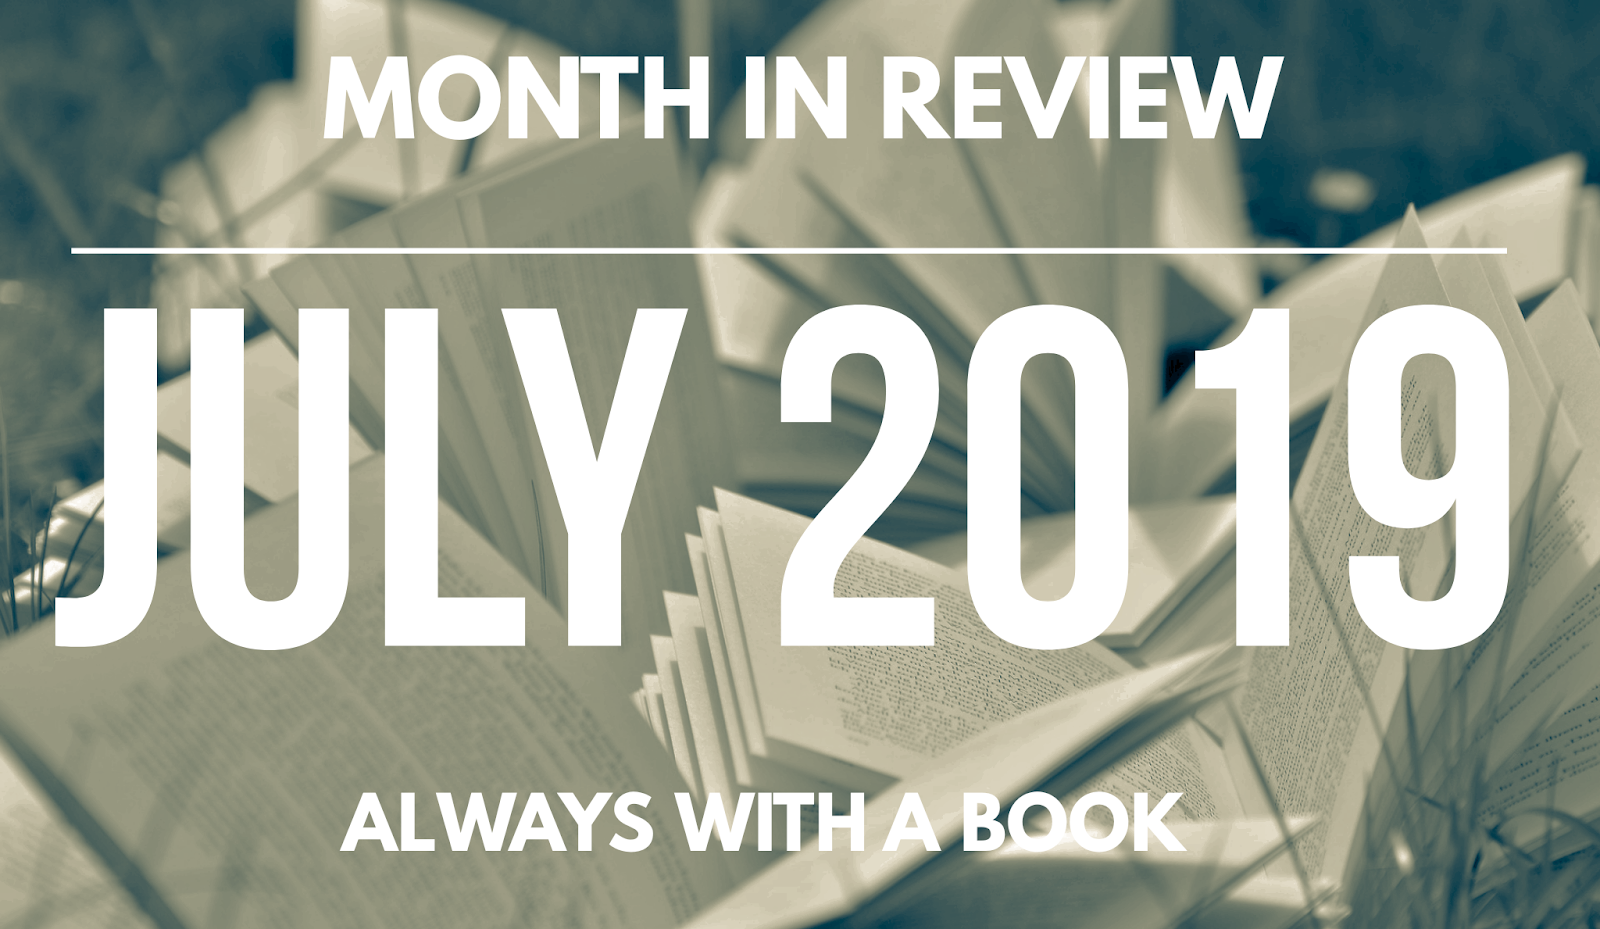 Month in Reviw: July 2019